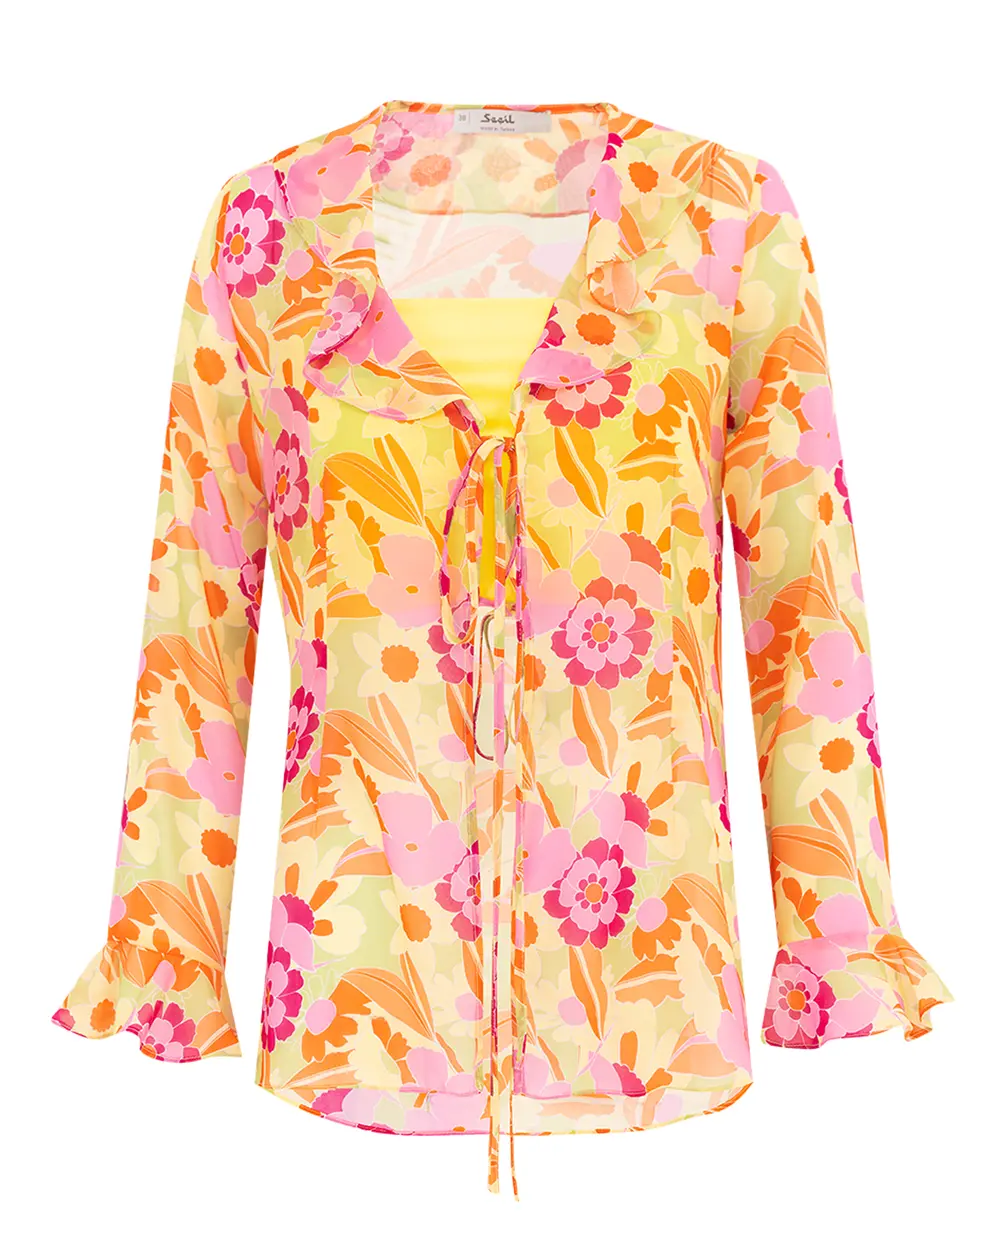 Ruffled Jacket With Floral Pattern Underwear Blouse